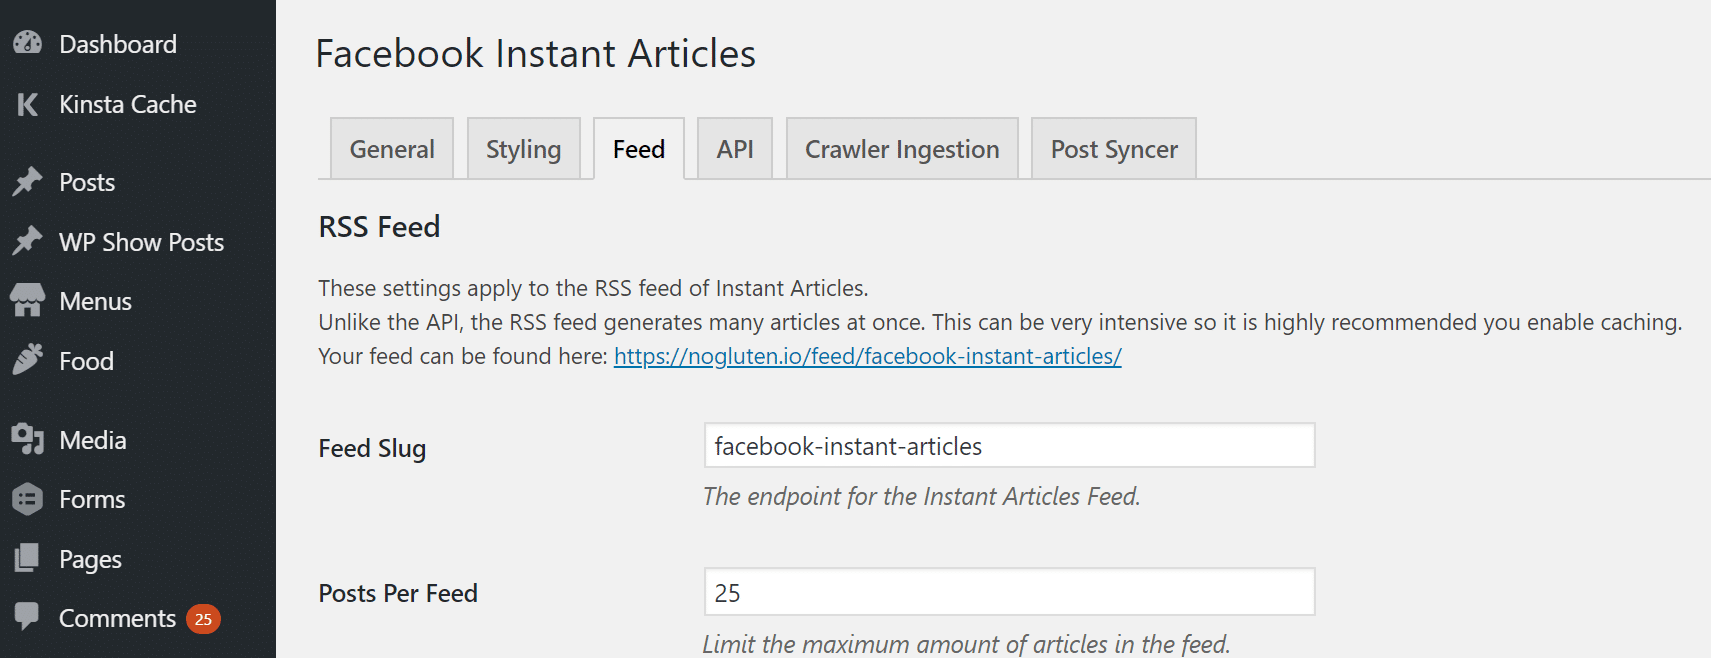 Facebook Instant Articles RSS feed